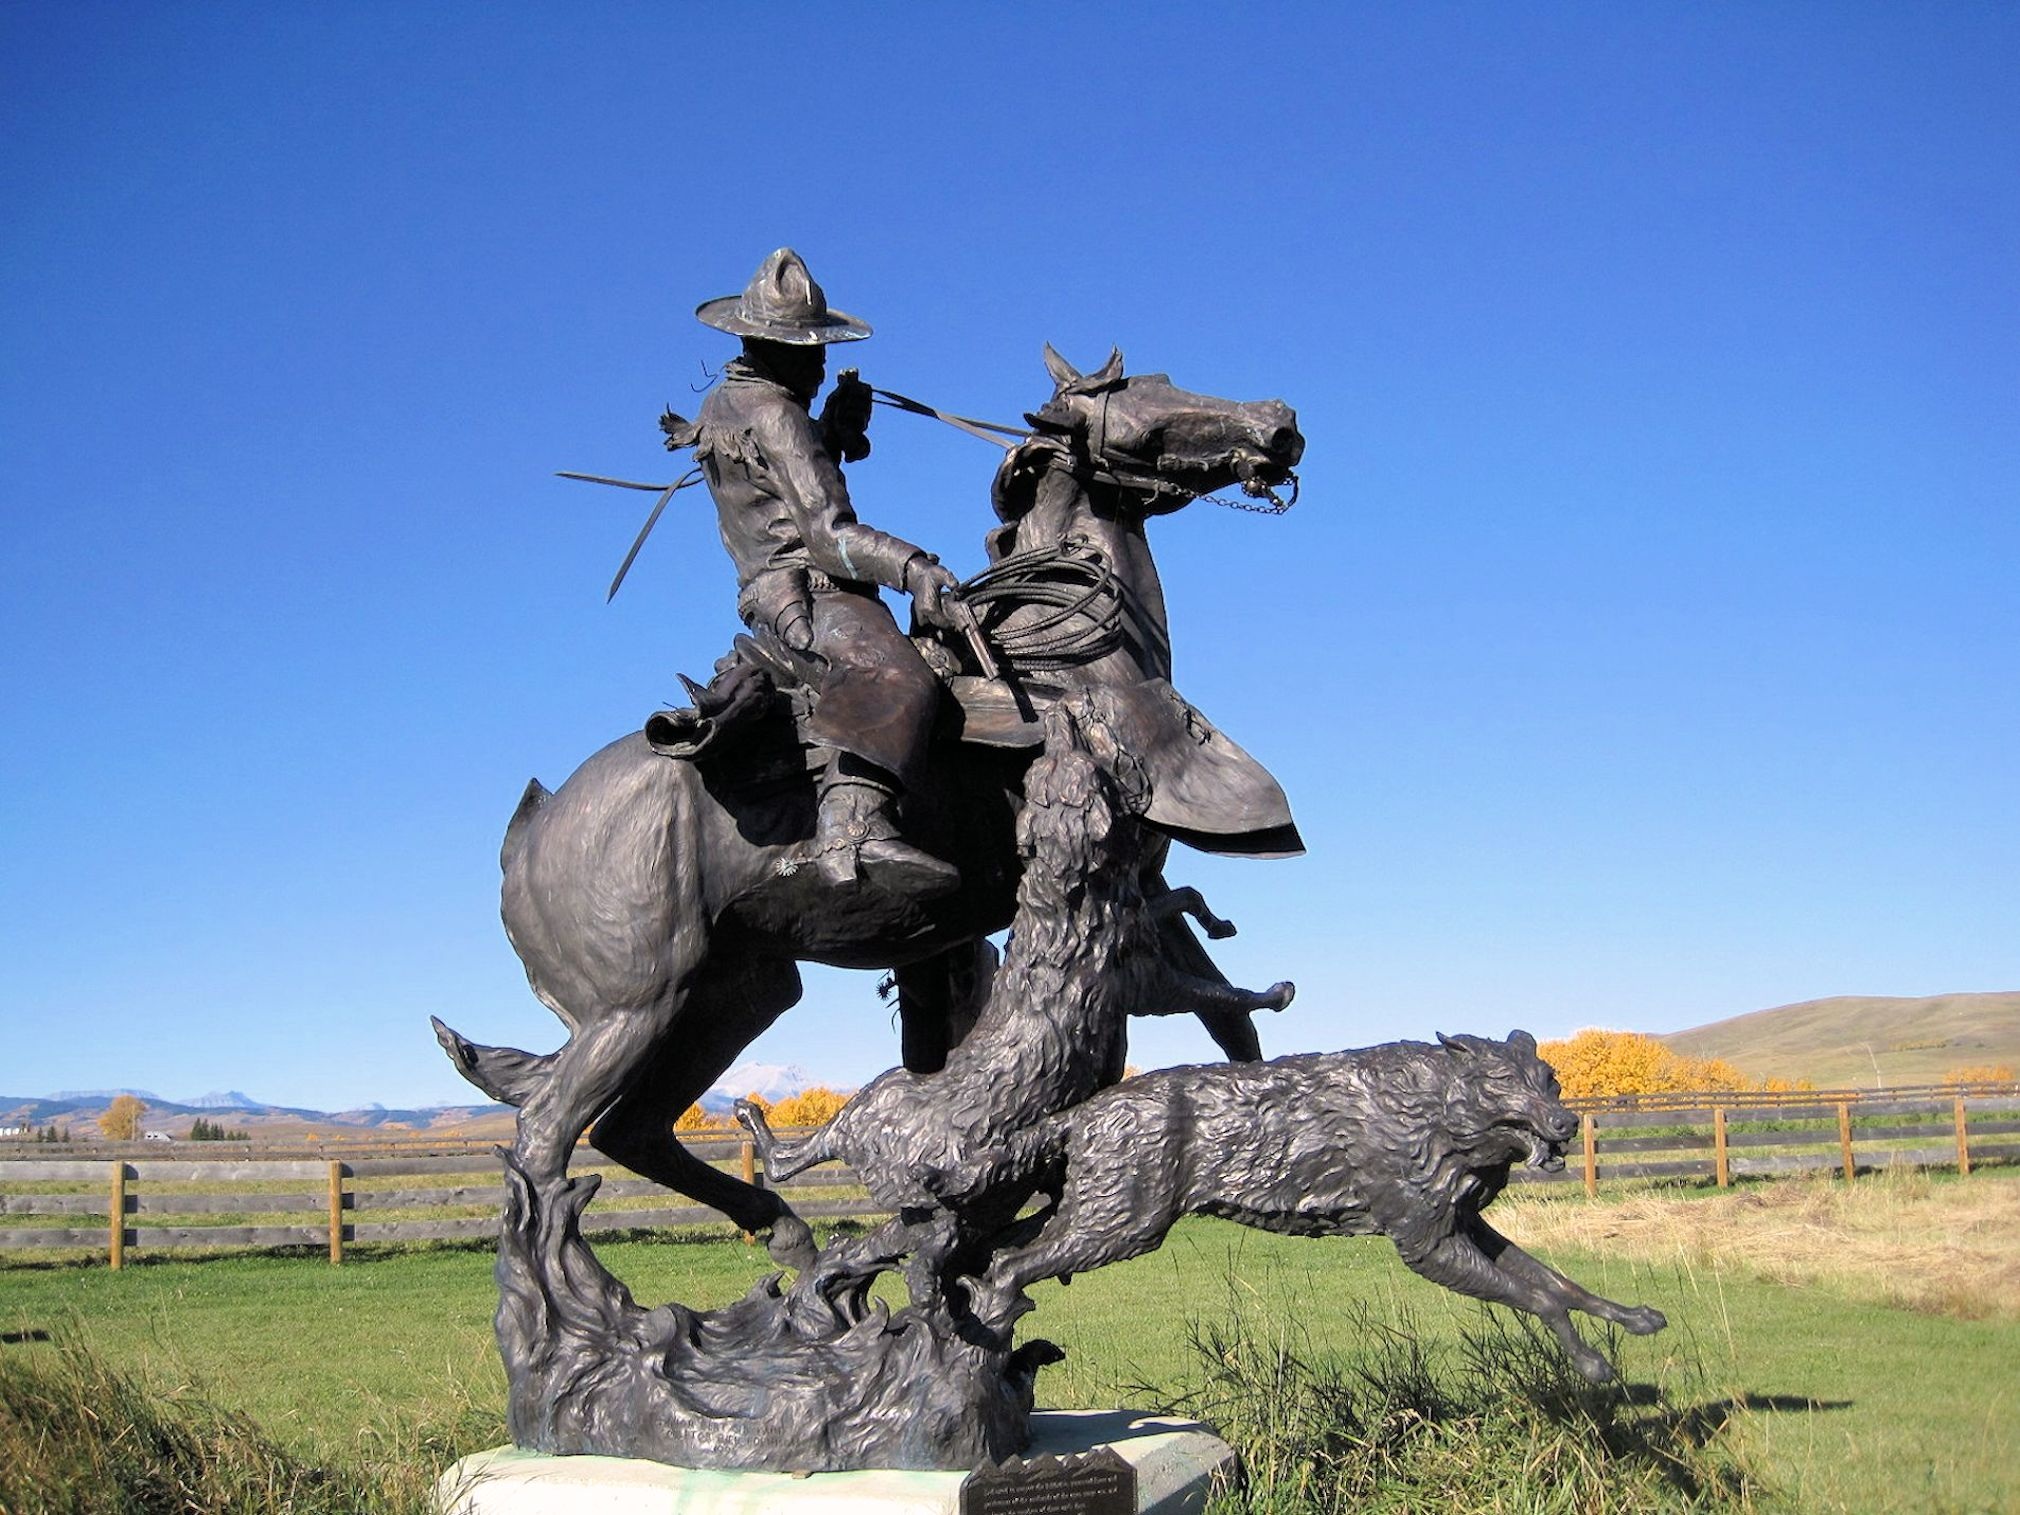 Sculpture of "Attacked by Wolves" at the Bar U Historic Ranch, Alberta Canada by pixel1